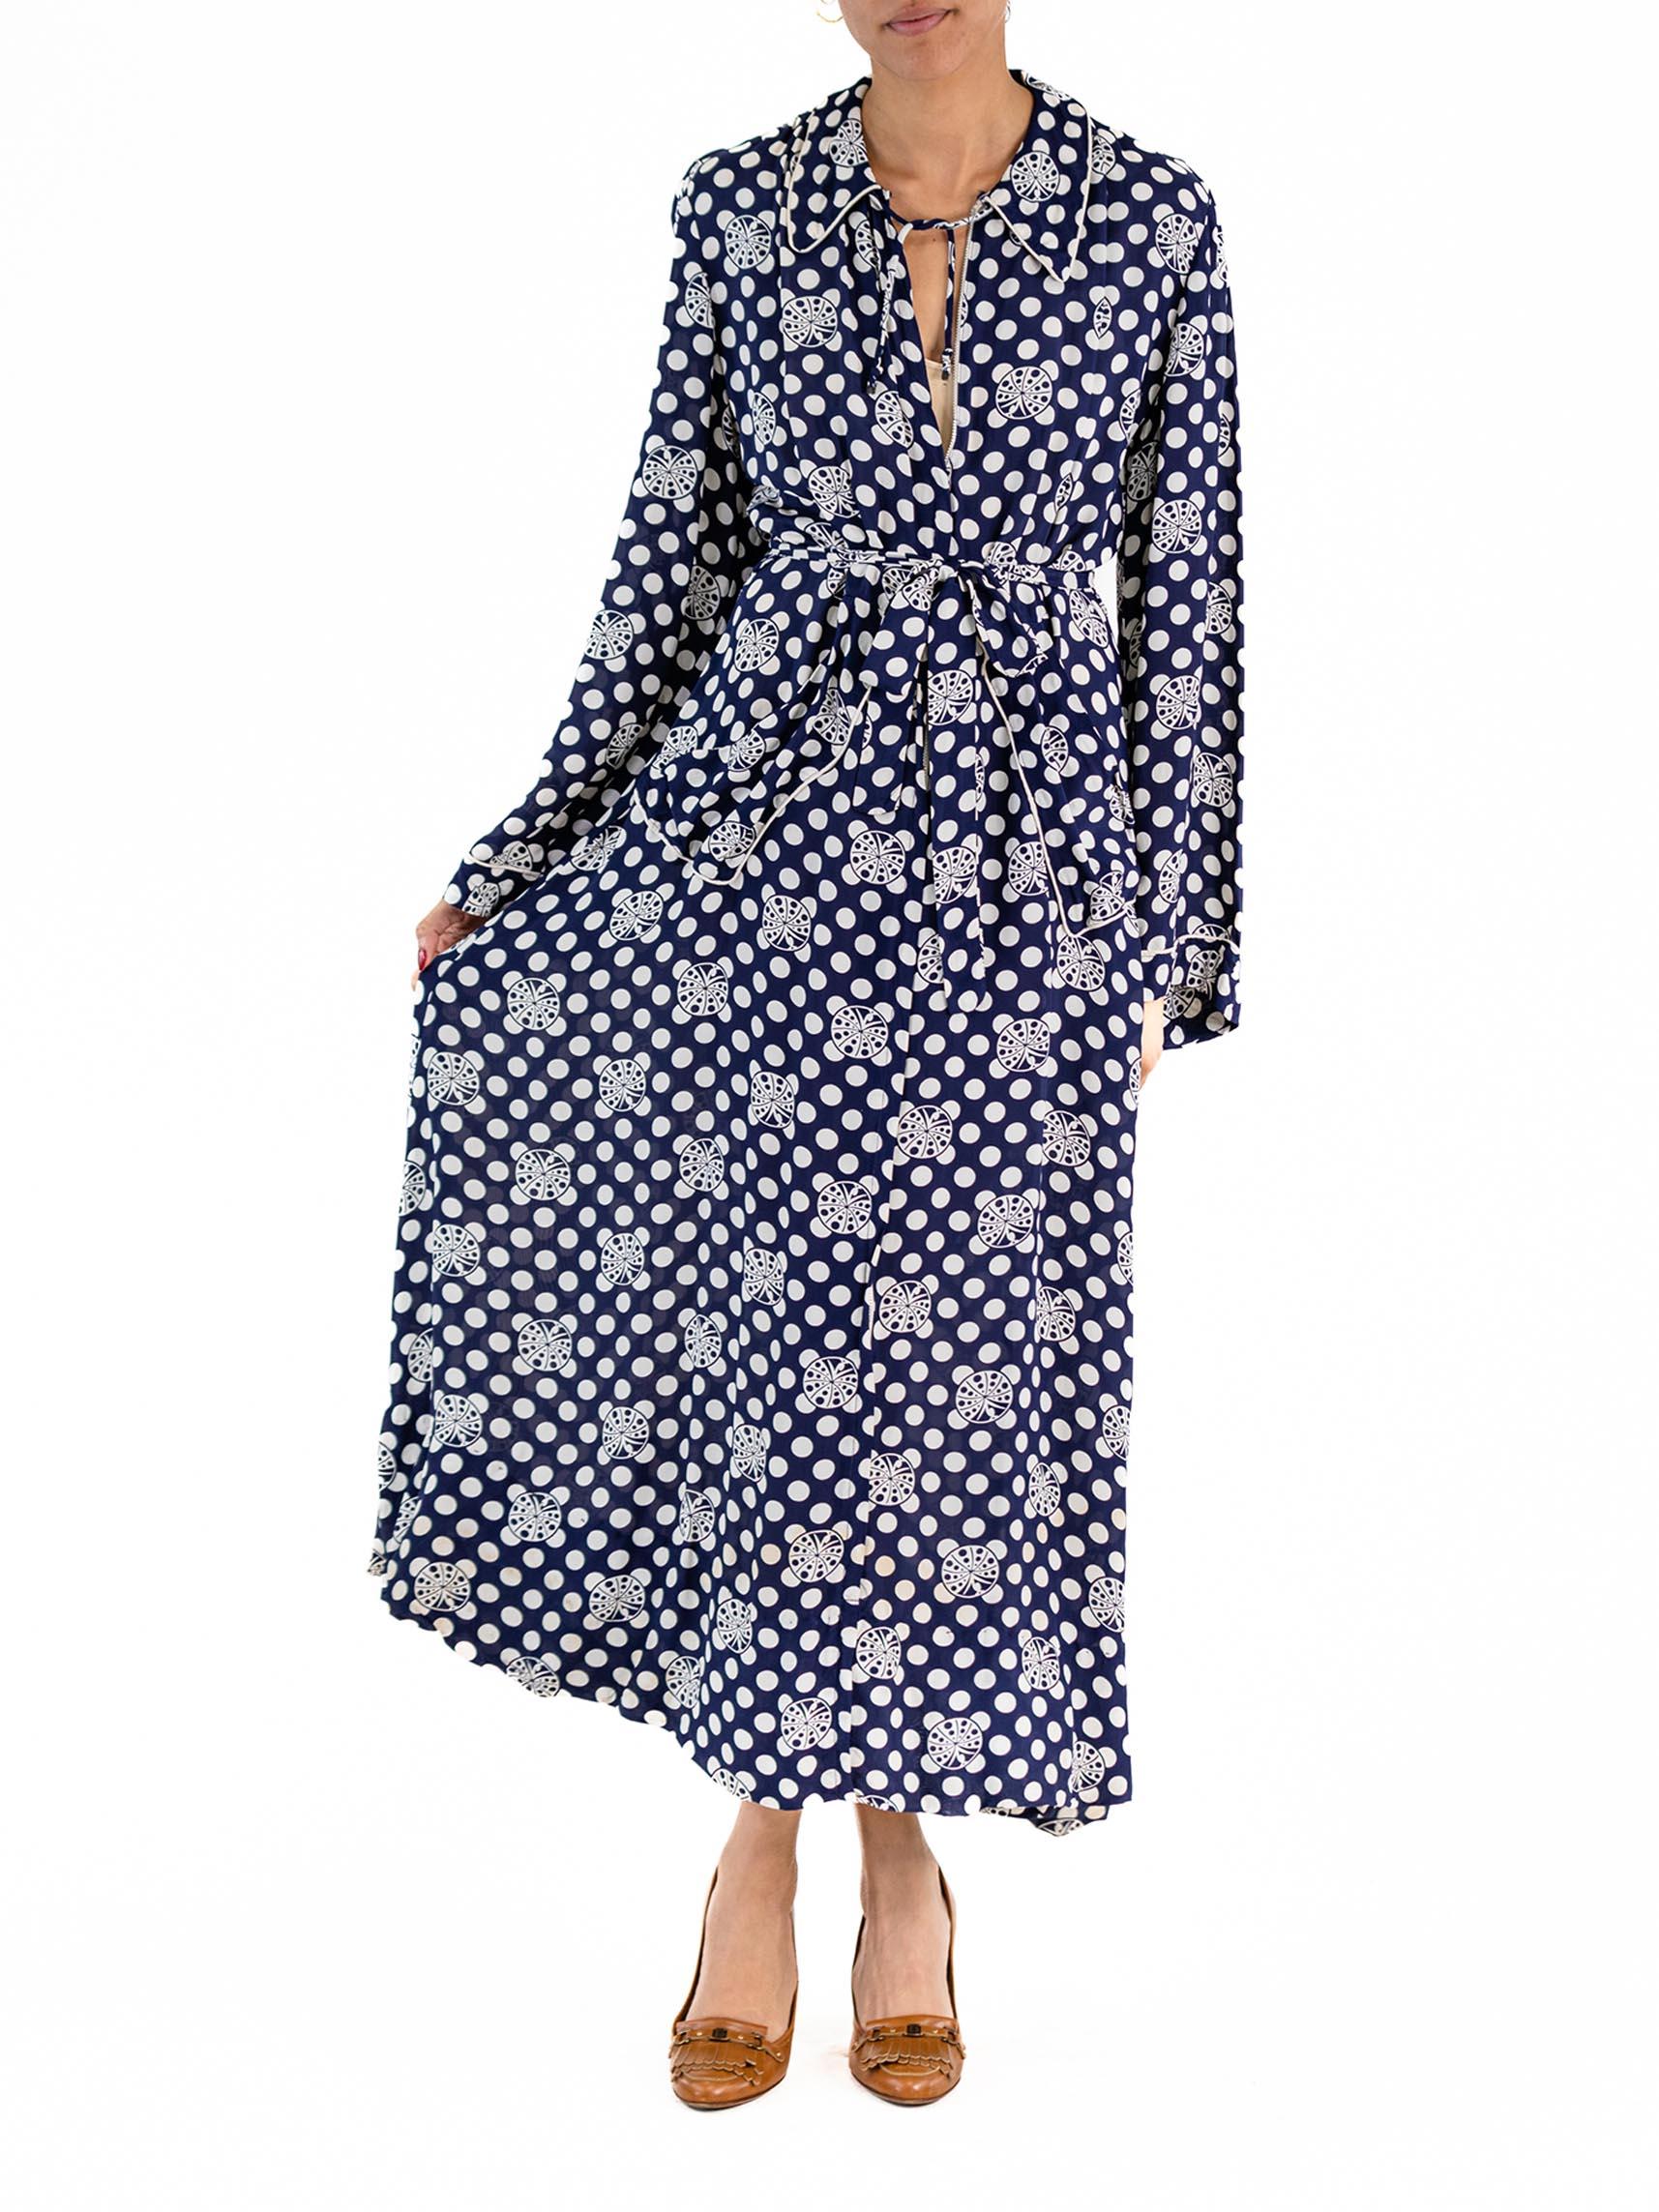 1940S Blue & White Cold Rayon Polka Dot Dress With Zipper Front Pockets For Sale 1